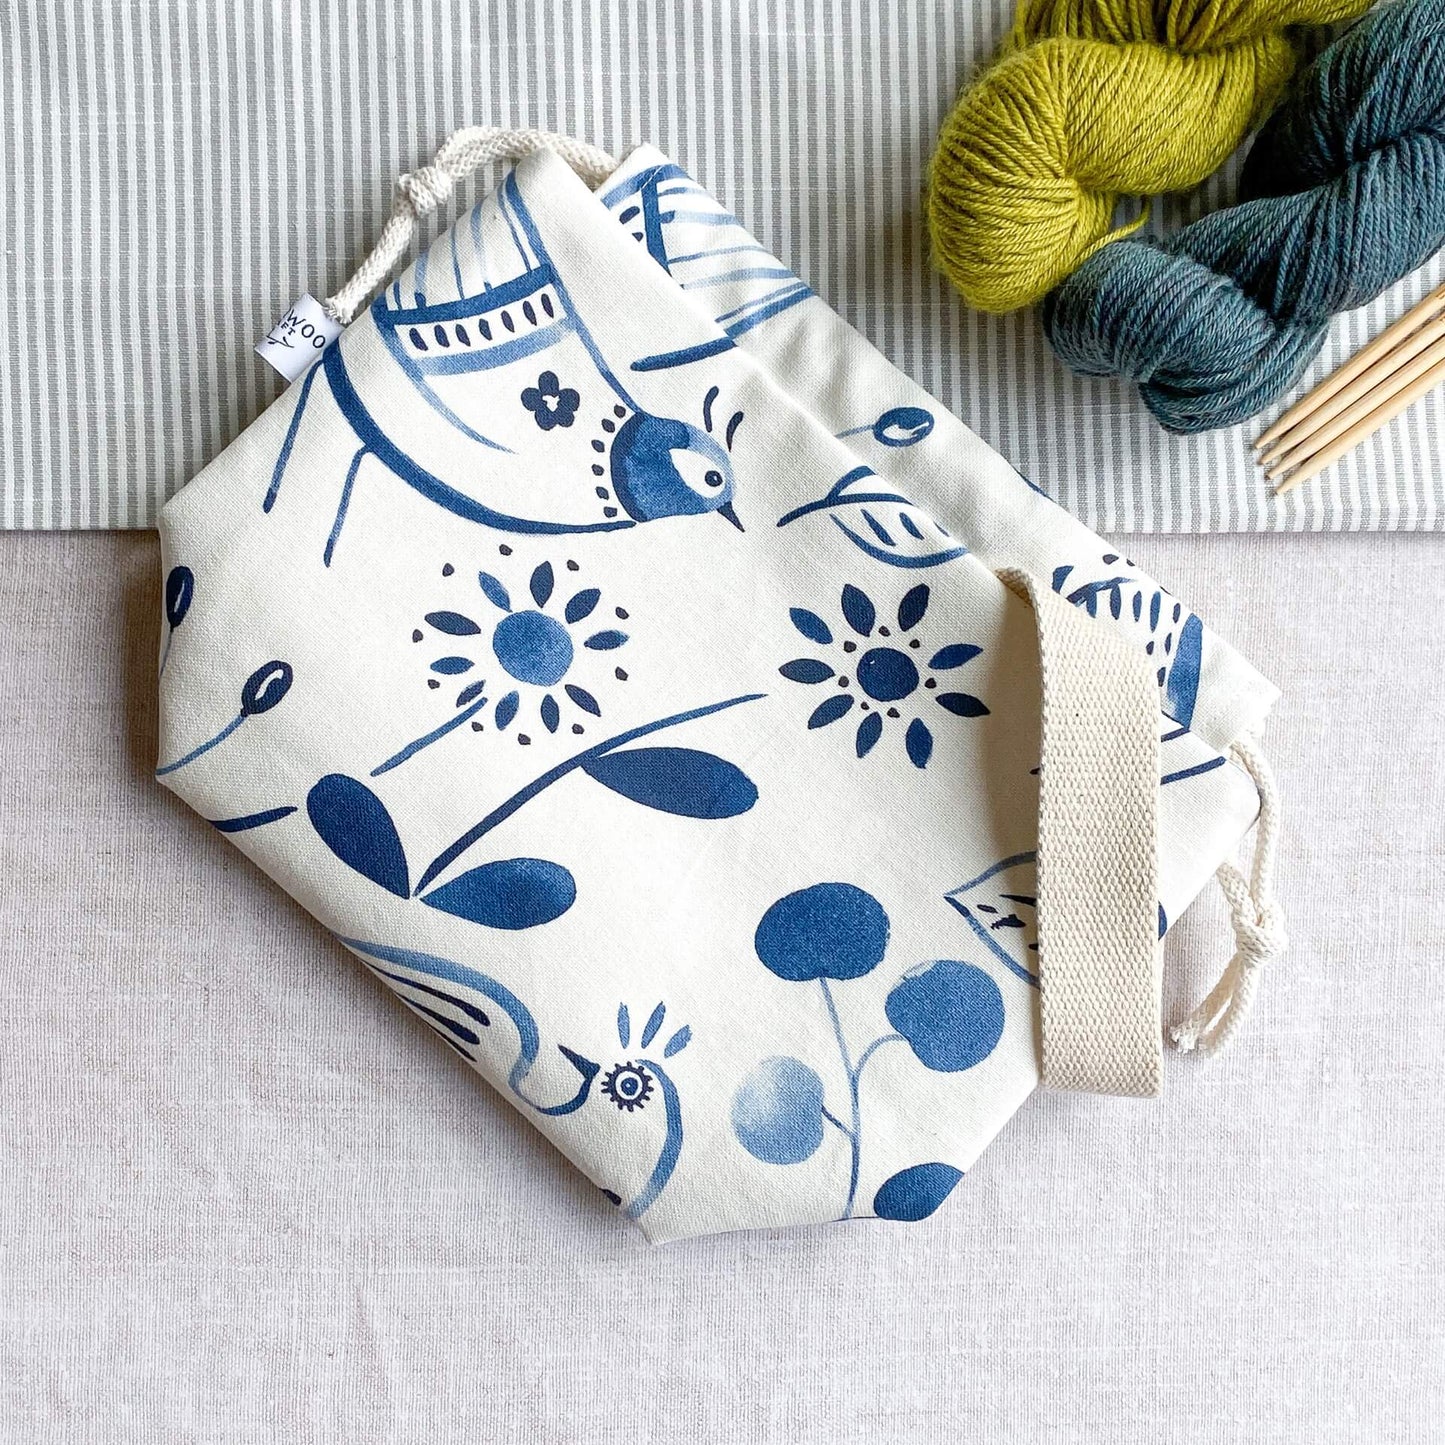 An indigo-colored folk art print knitting project bag is lying flat on a table top. The bag is rectangular in shape and made of fabric. It features a vibrant folk art image on its surface. Just in view are two skeins of yarn and four wooden knitting needles. 